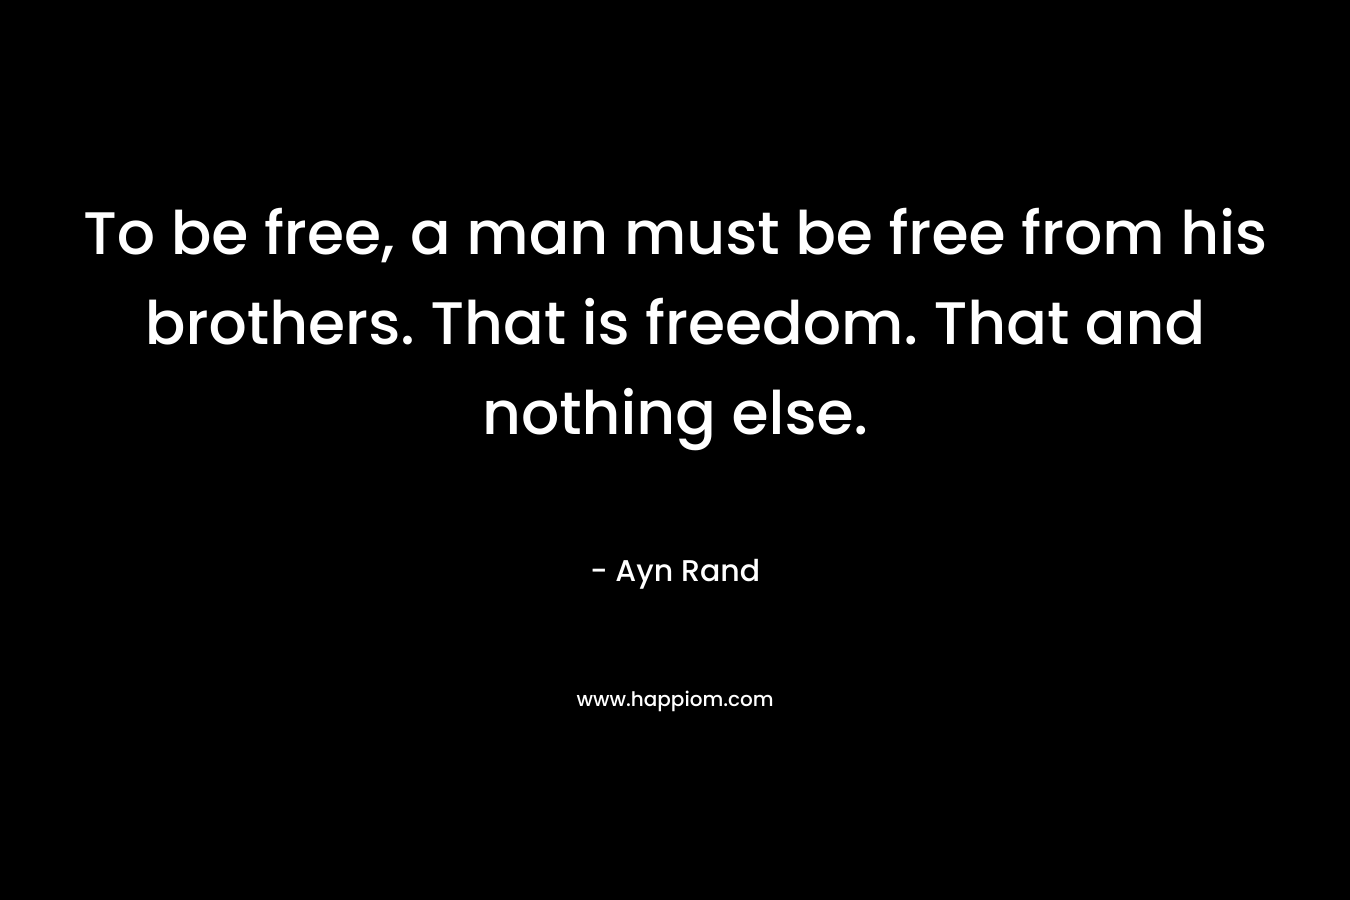 To be free, a man must be free from his brothers. That is freedom. That and nothing else.